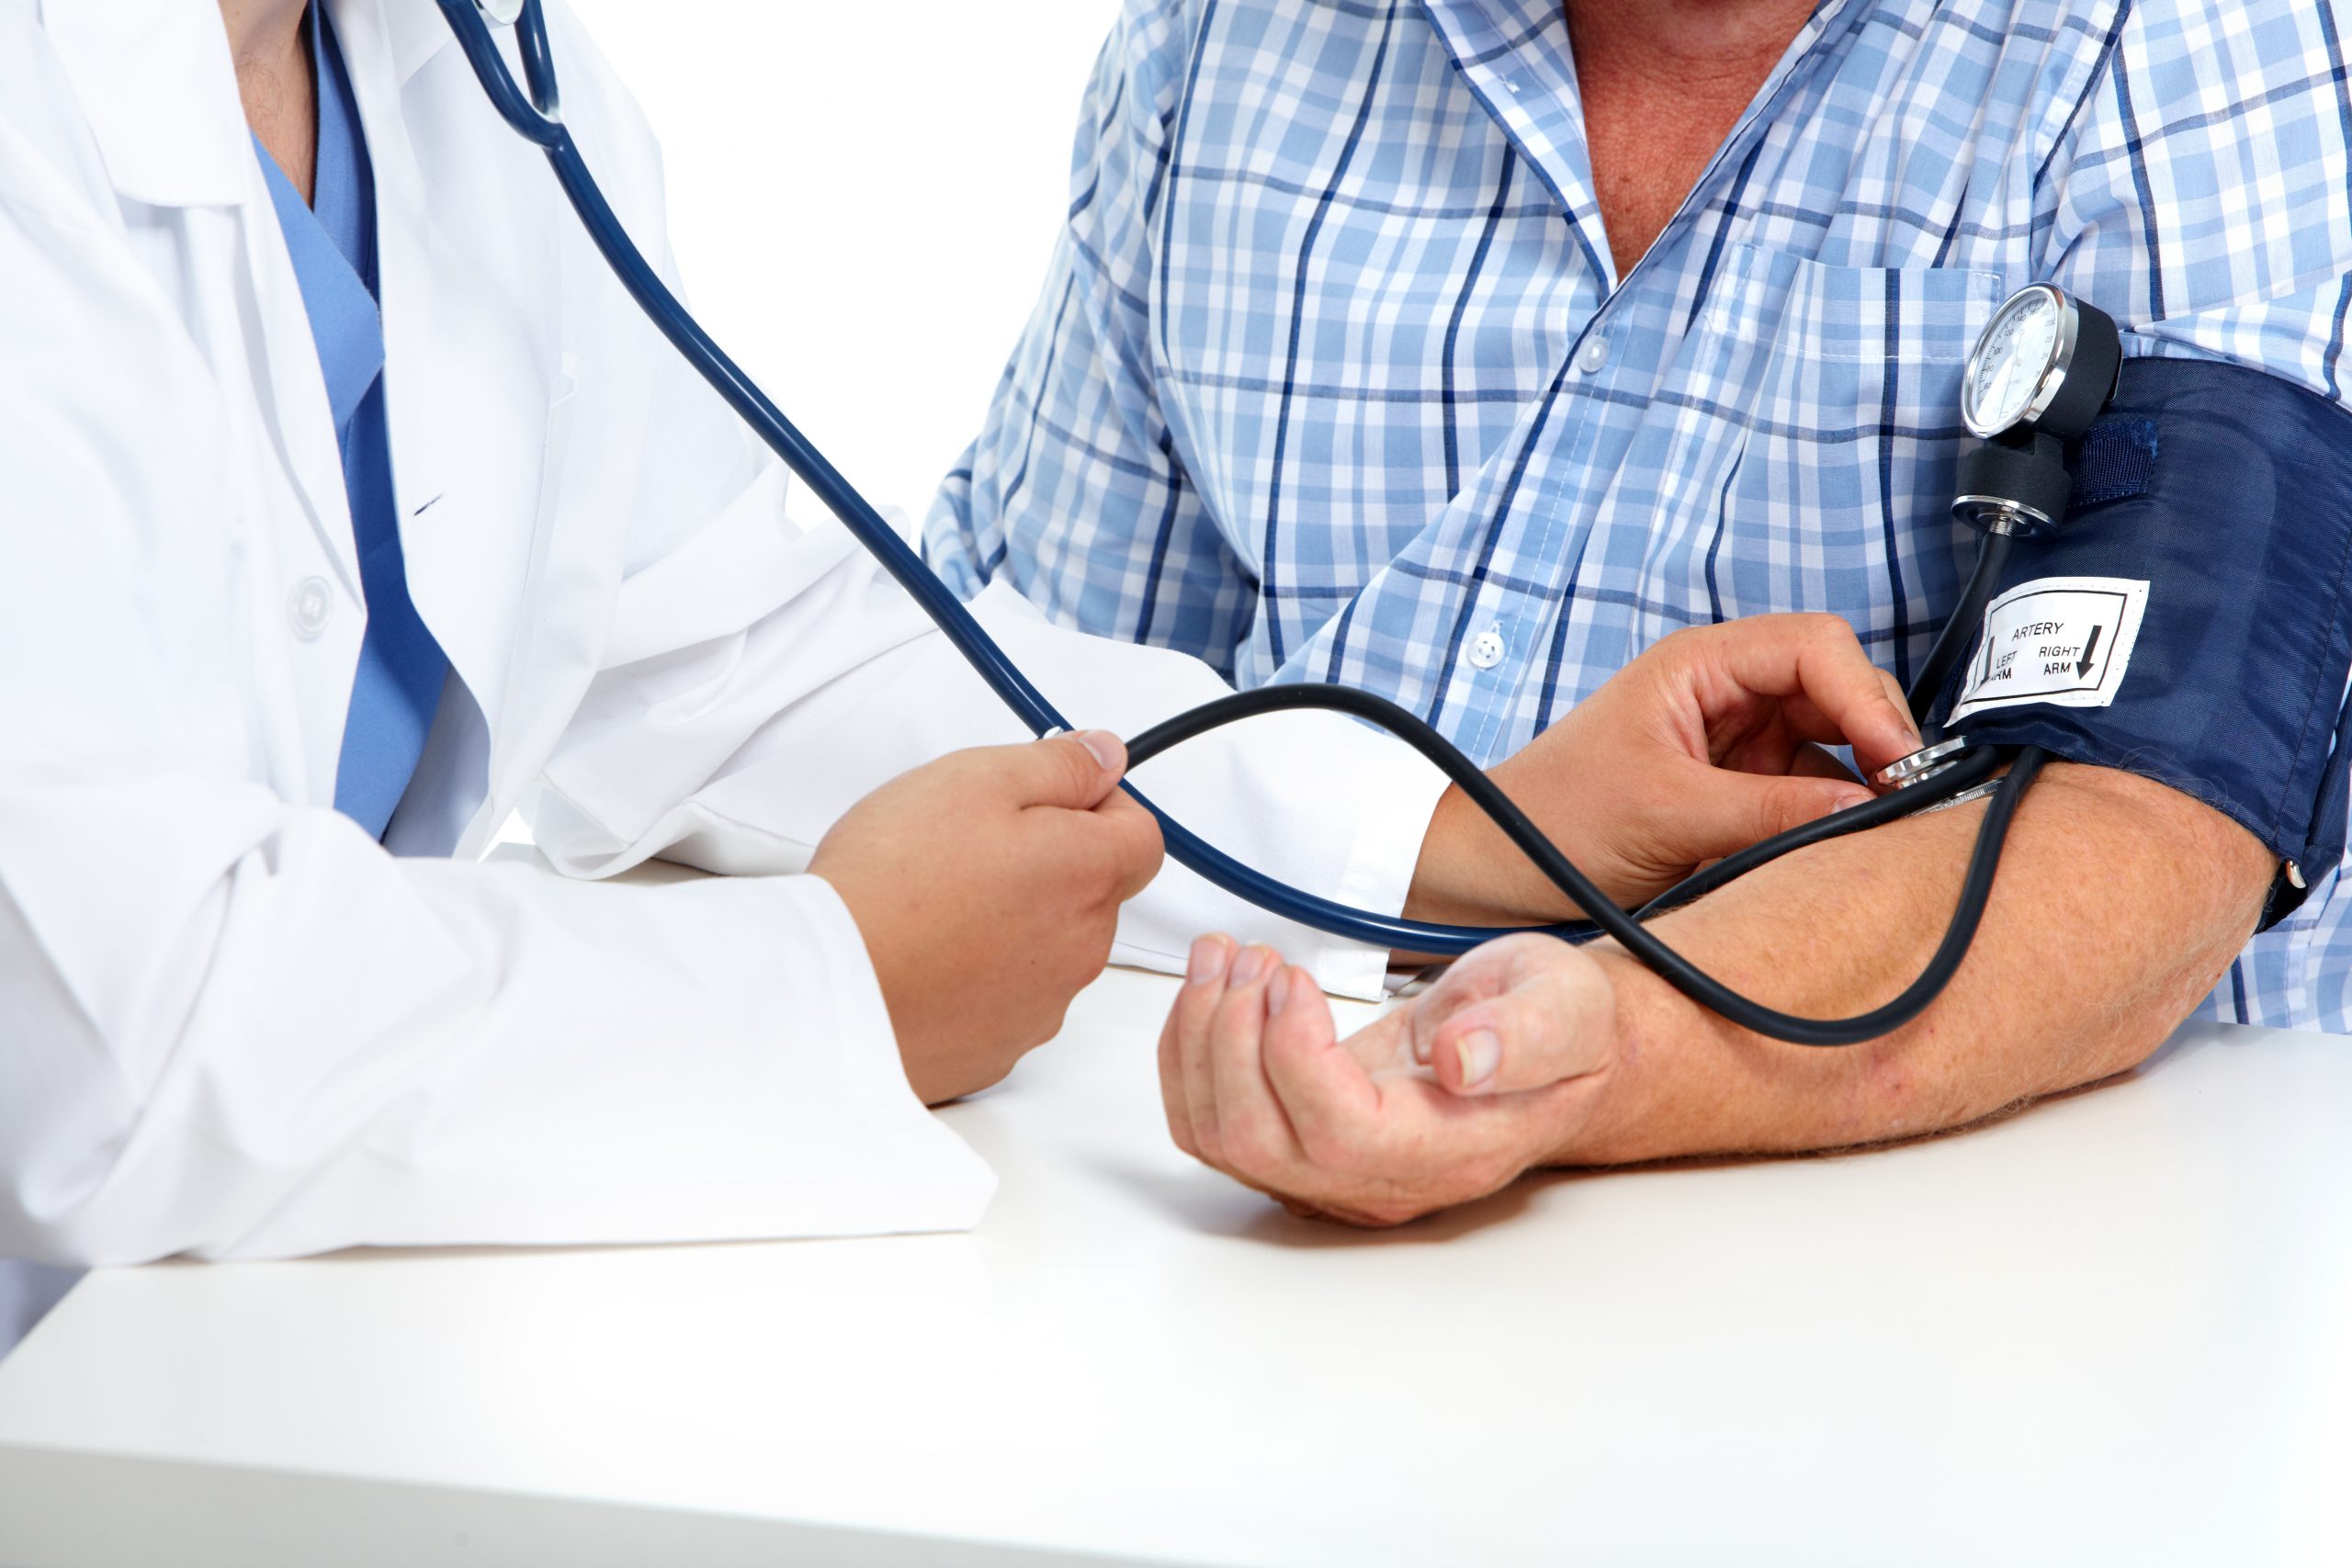 Four tips to keep your blood pressure in check